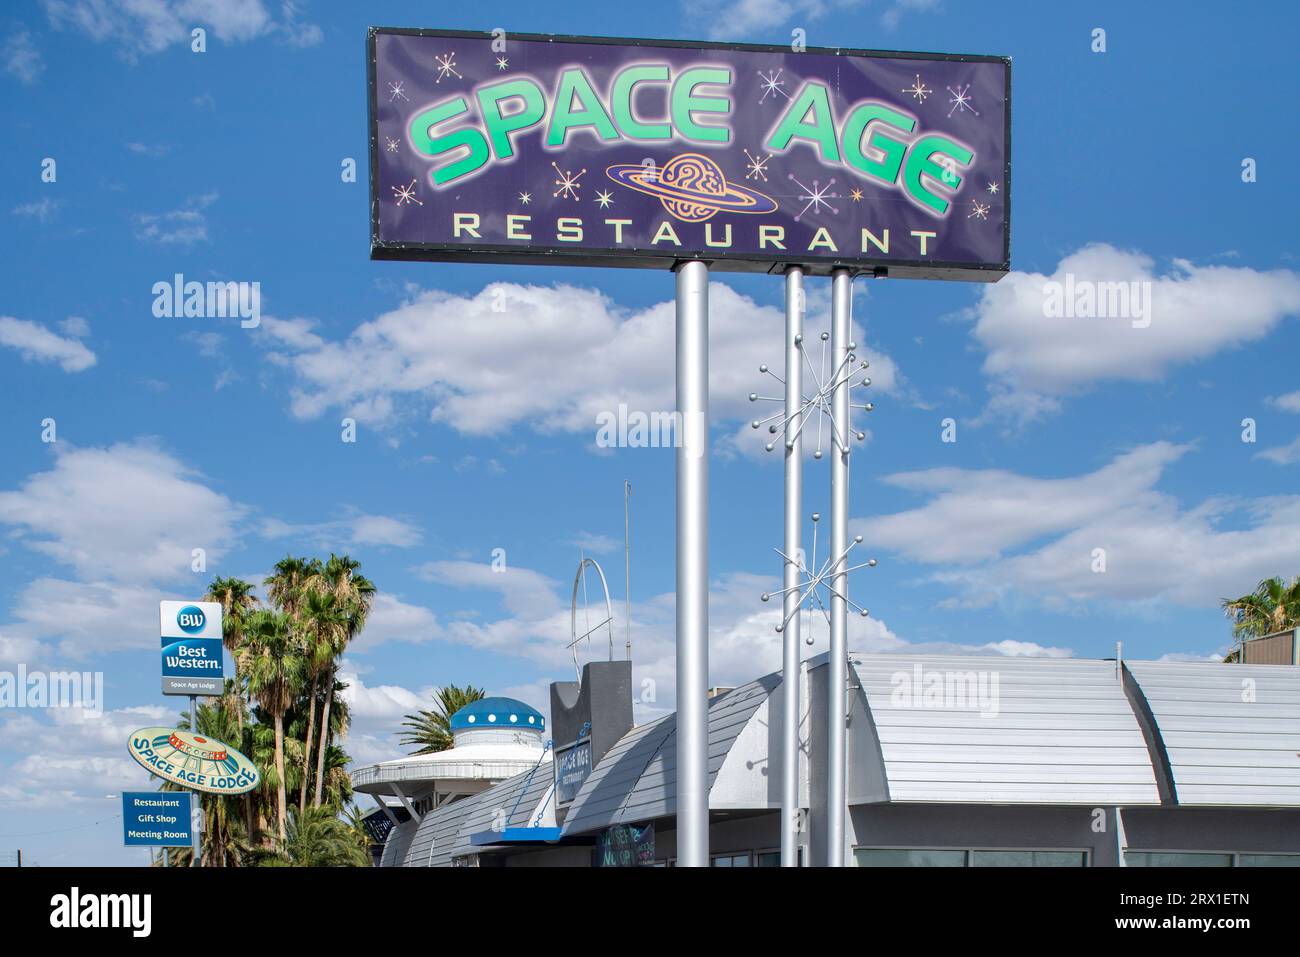 Space Age Lodge signage and roof top view Stock Photo